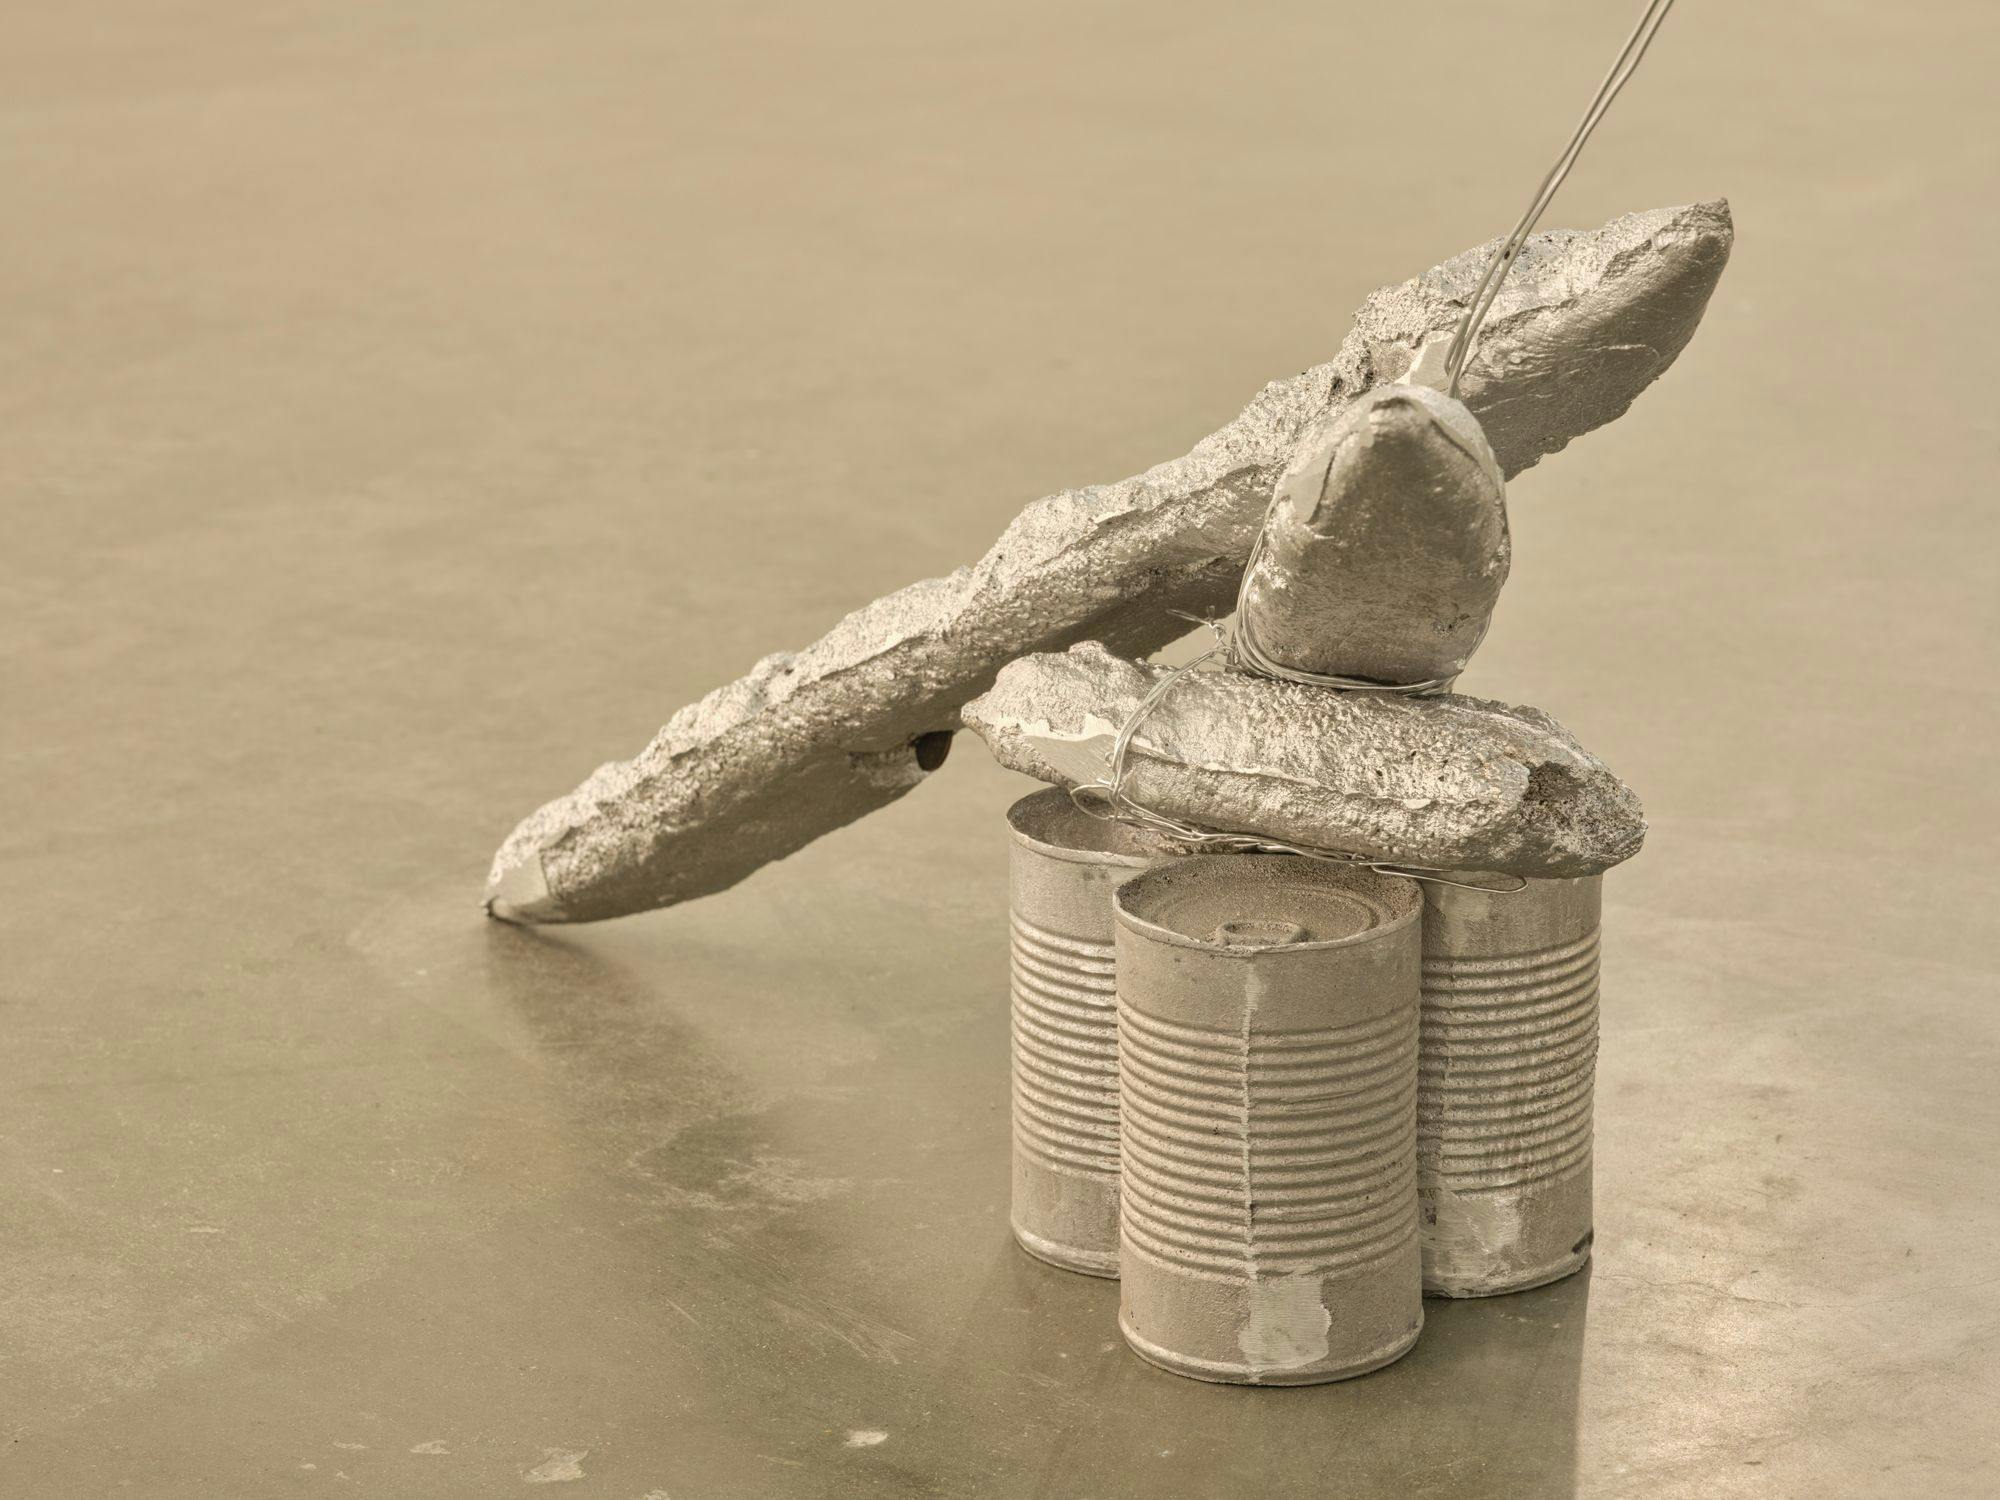 A detail of a sculpture comprised of silver-painted baguettes, wire, and aluminum cans.